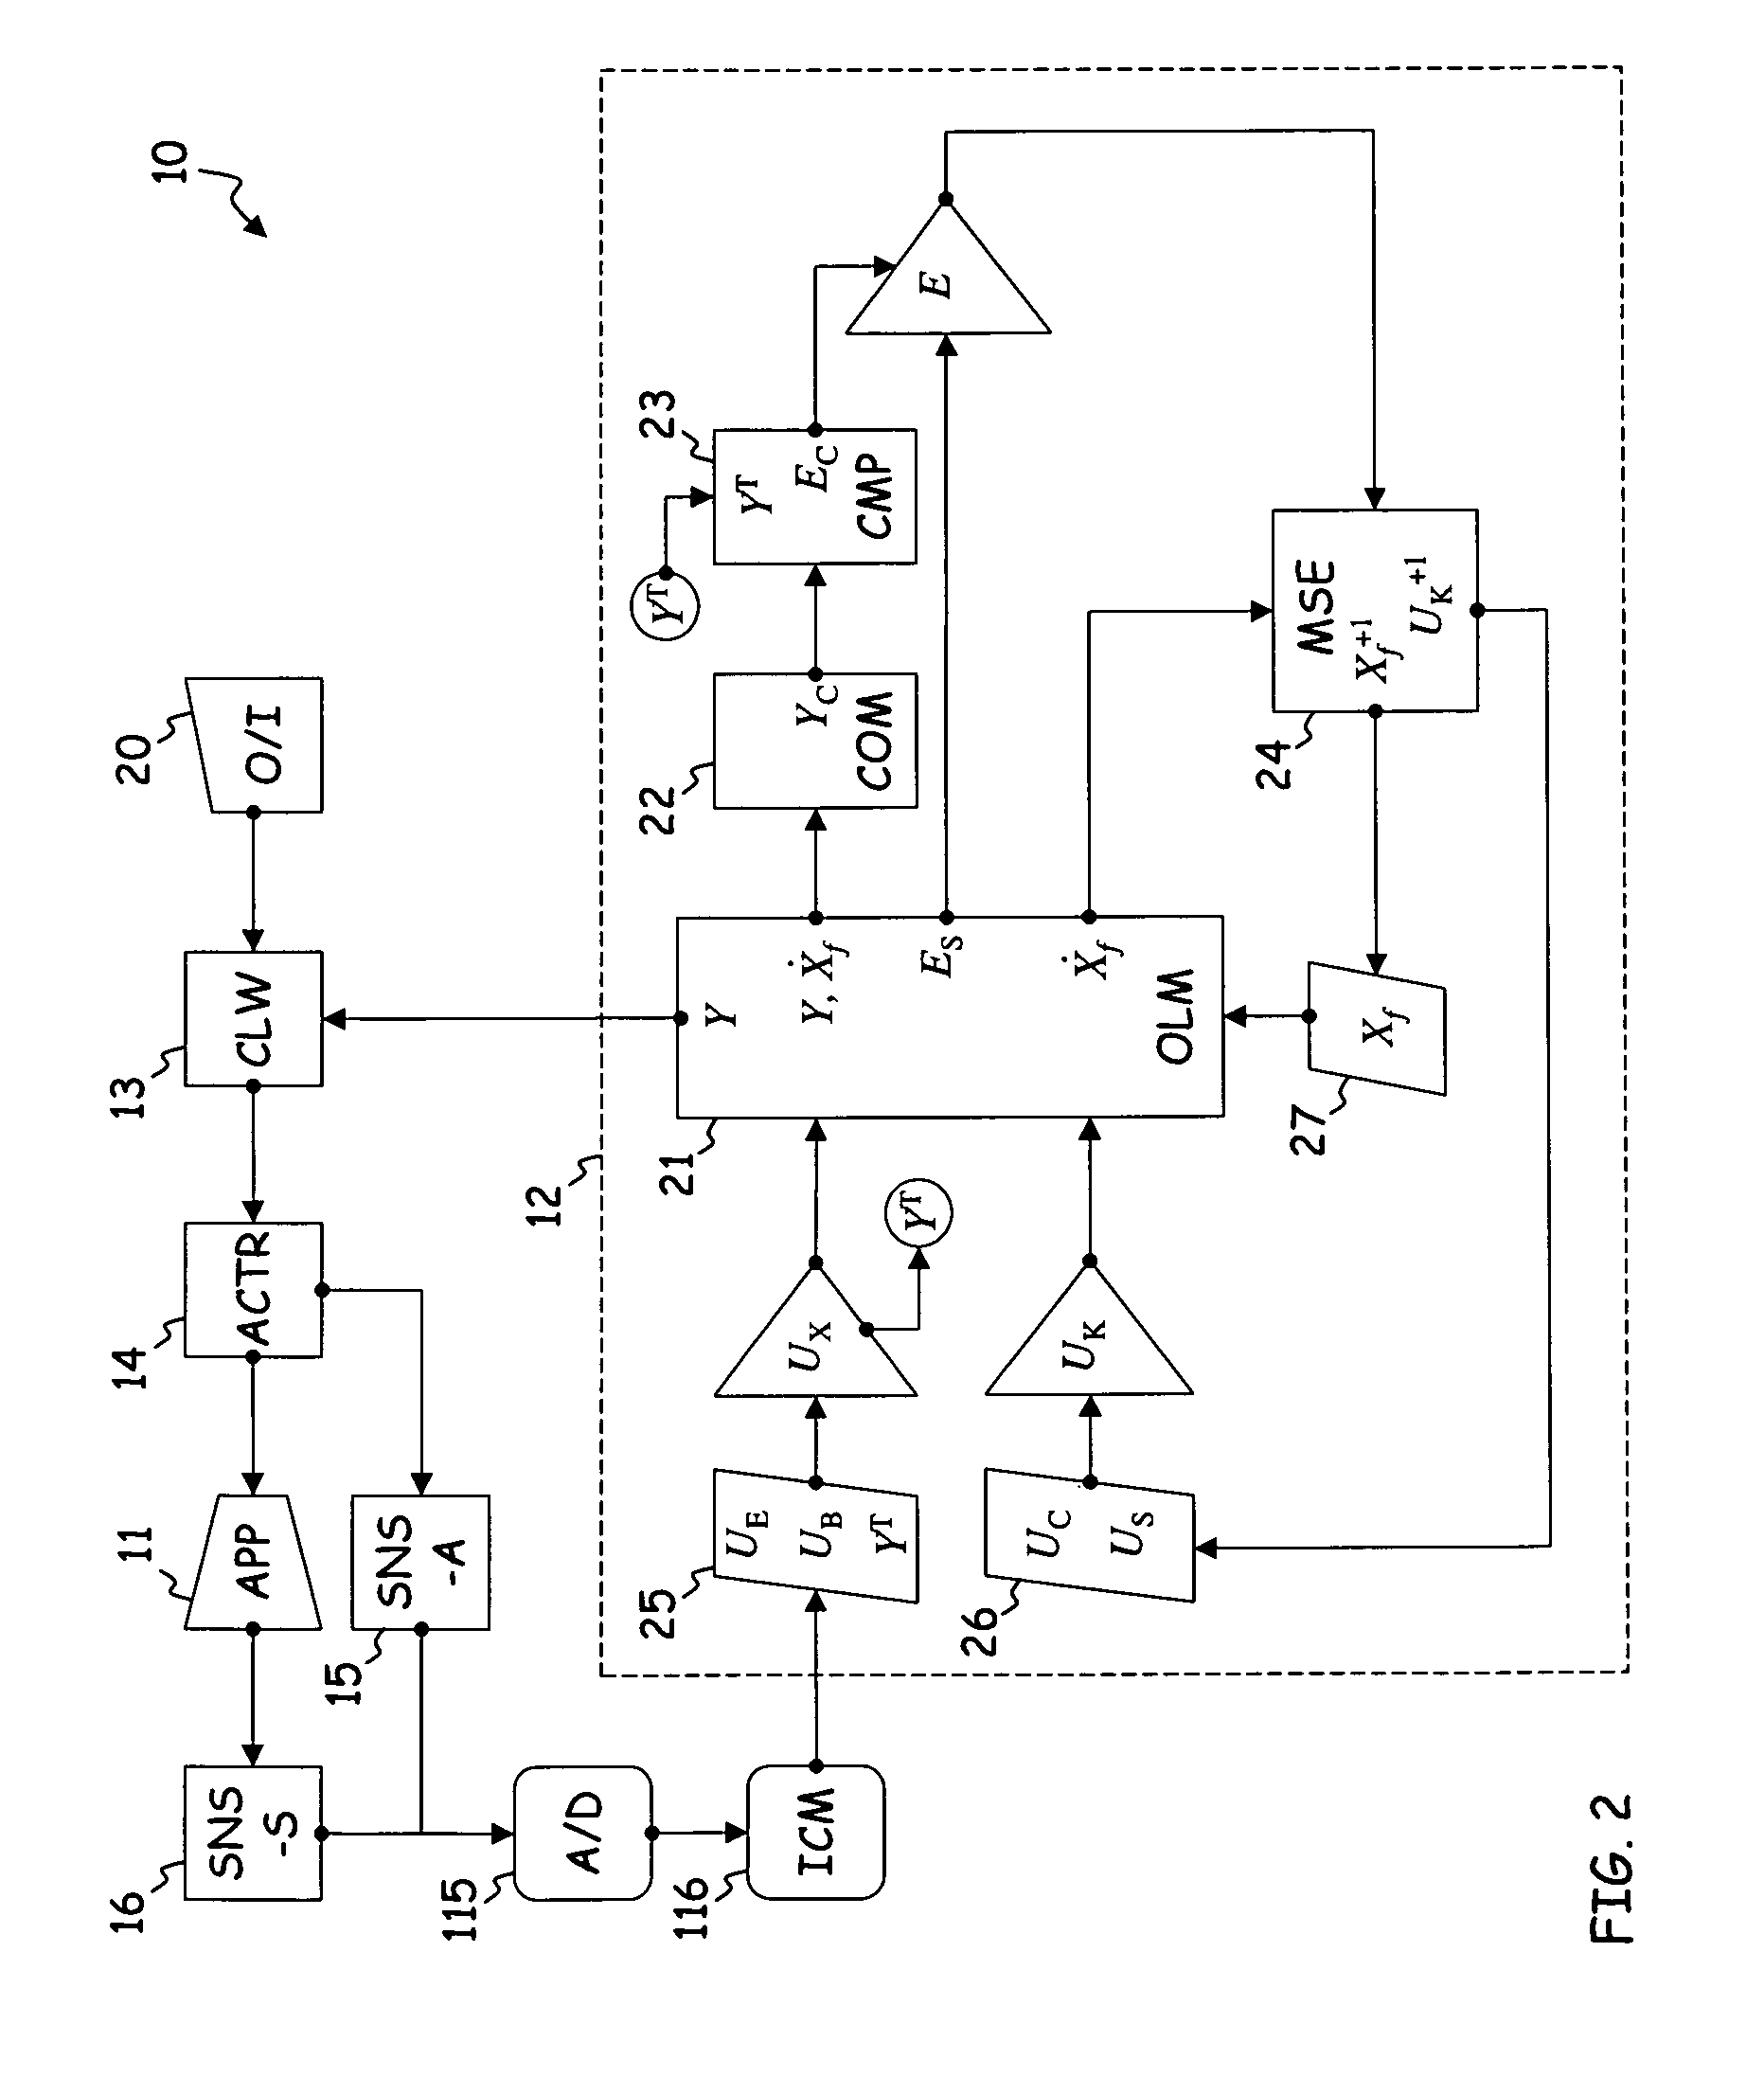 System and method for design and control of engineering systems utilizing component-level dynamic mathematical model